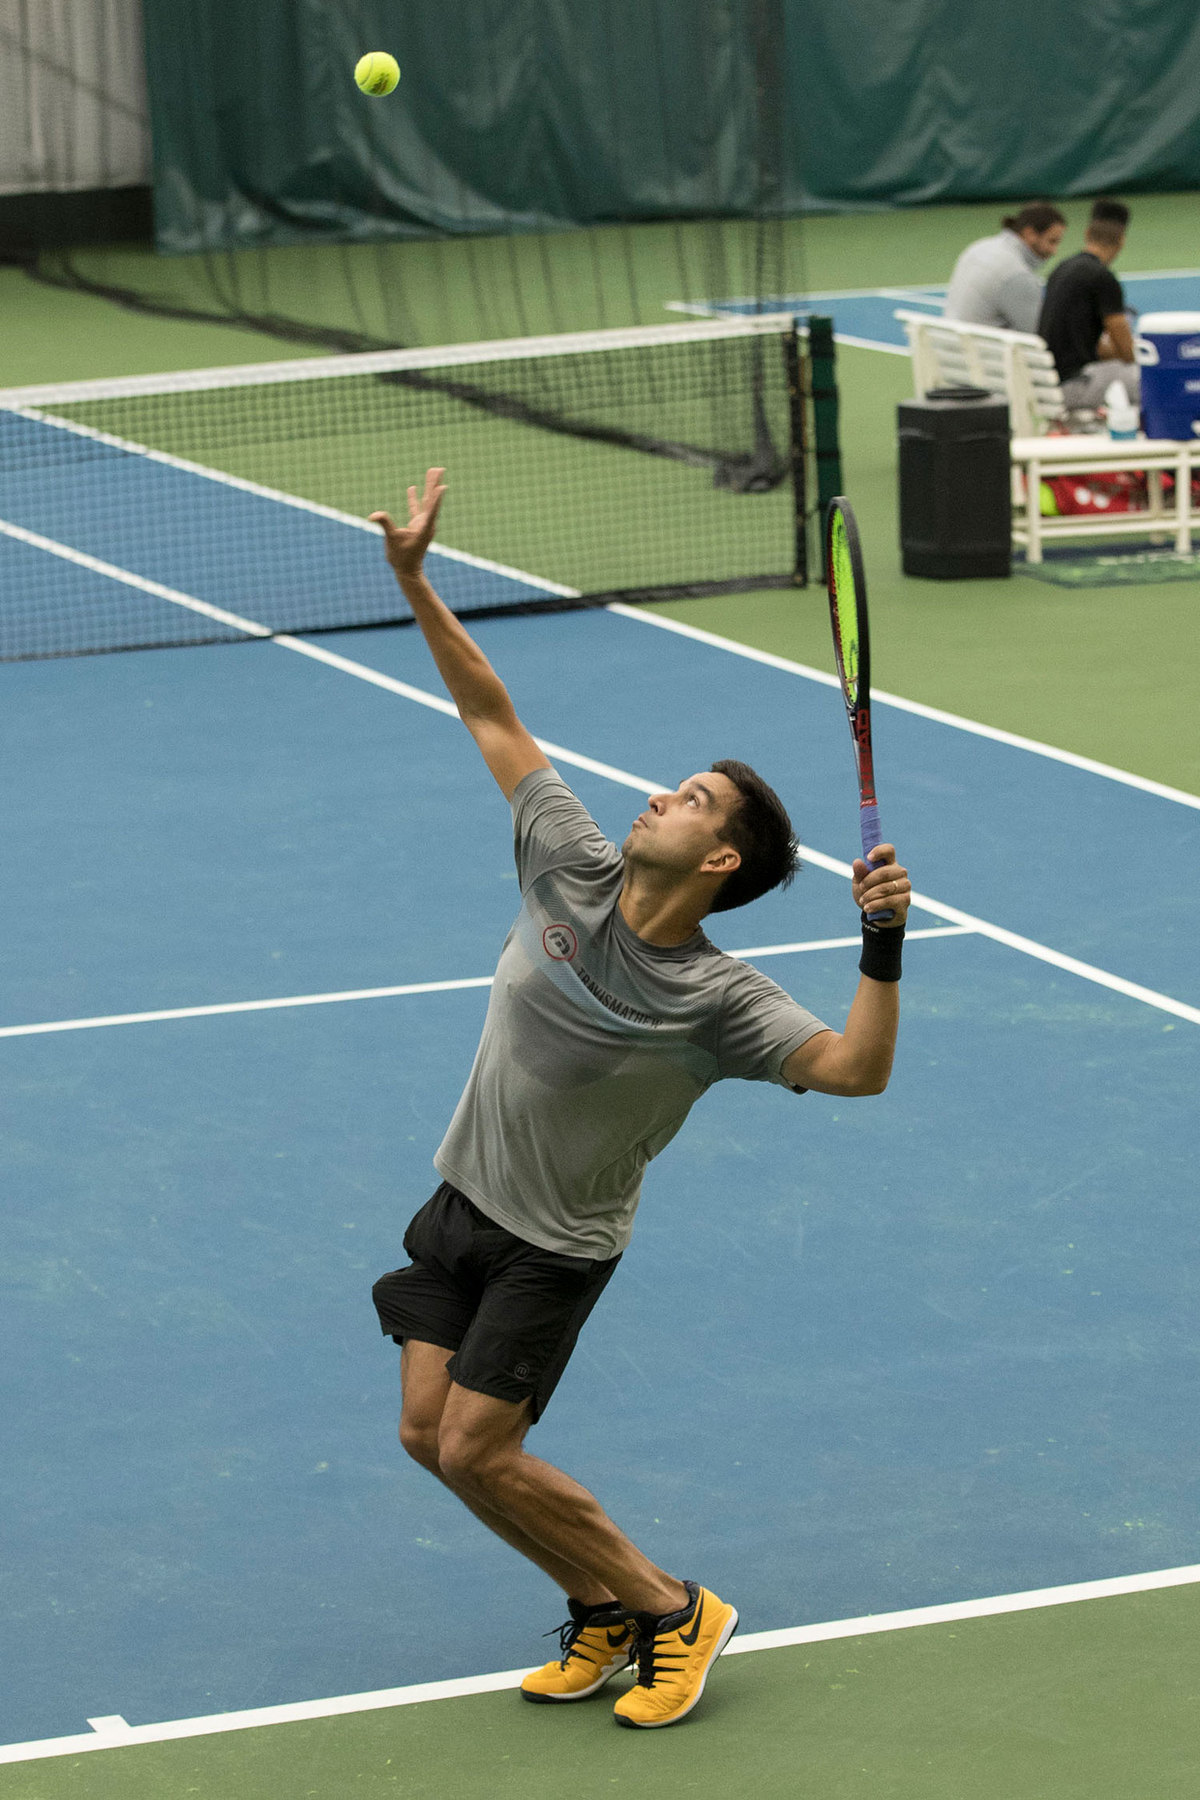 A strong serve has helped Huey have success as a professional. 